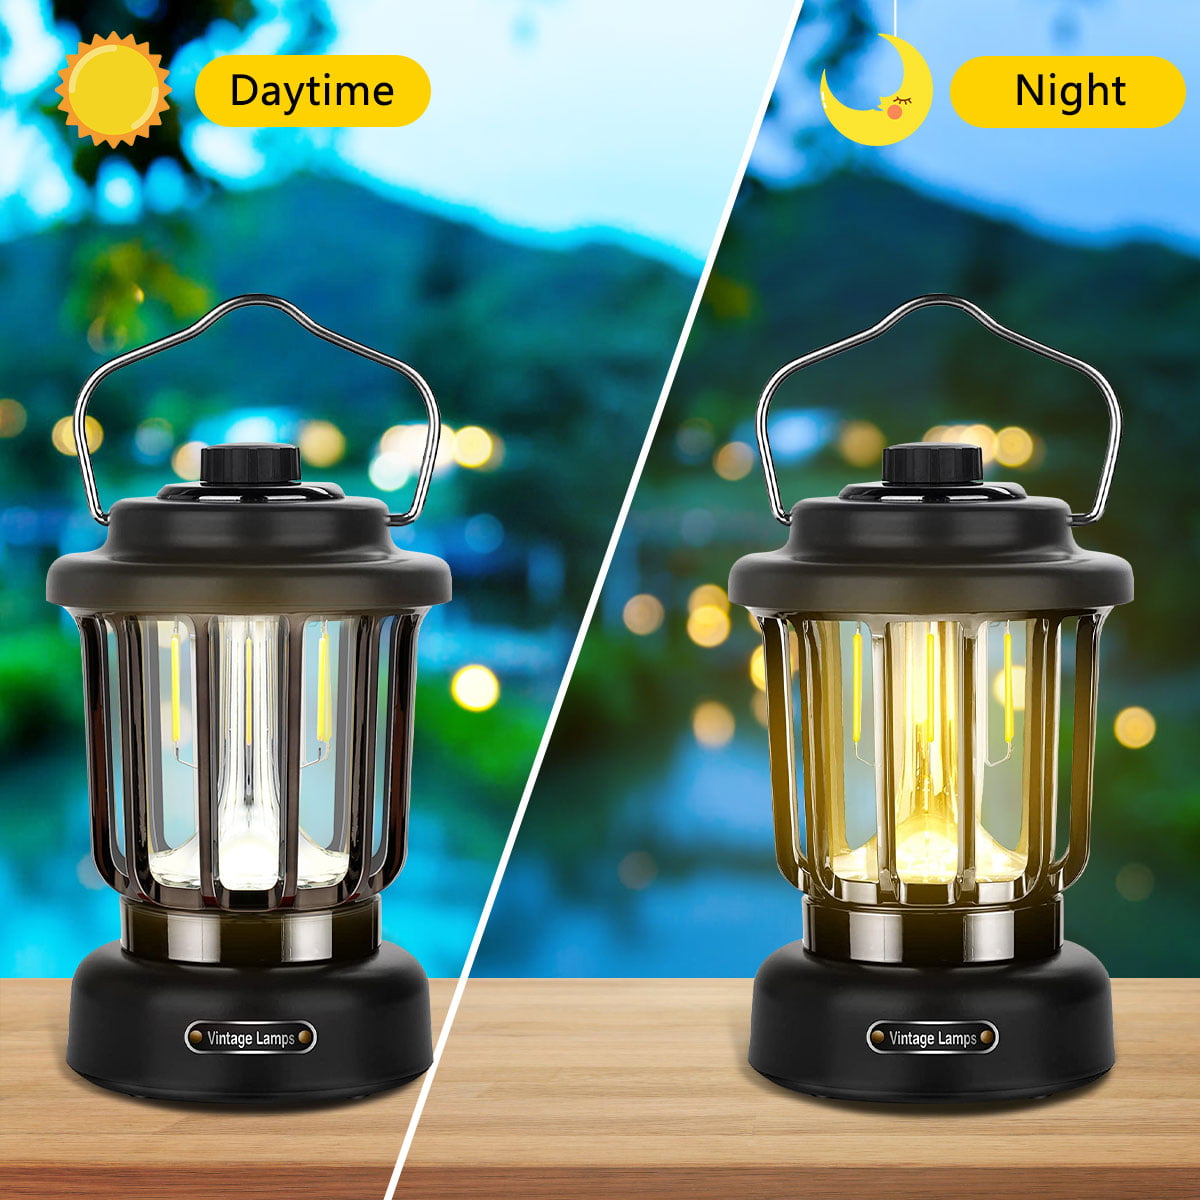 5200mAh USB Rechargeable Lantern Led Waterproof Camping Lantern Outdoor  Portable Lanterns with Hook Tents Battery Led